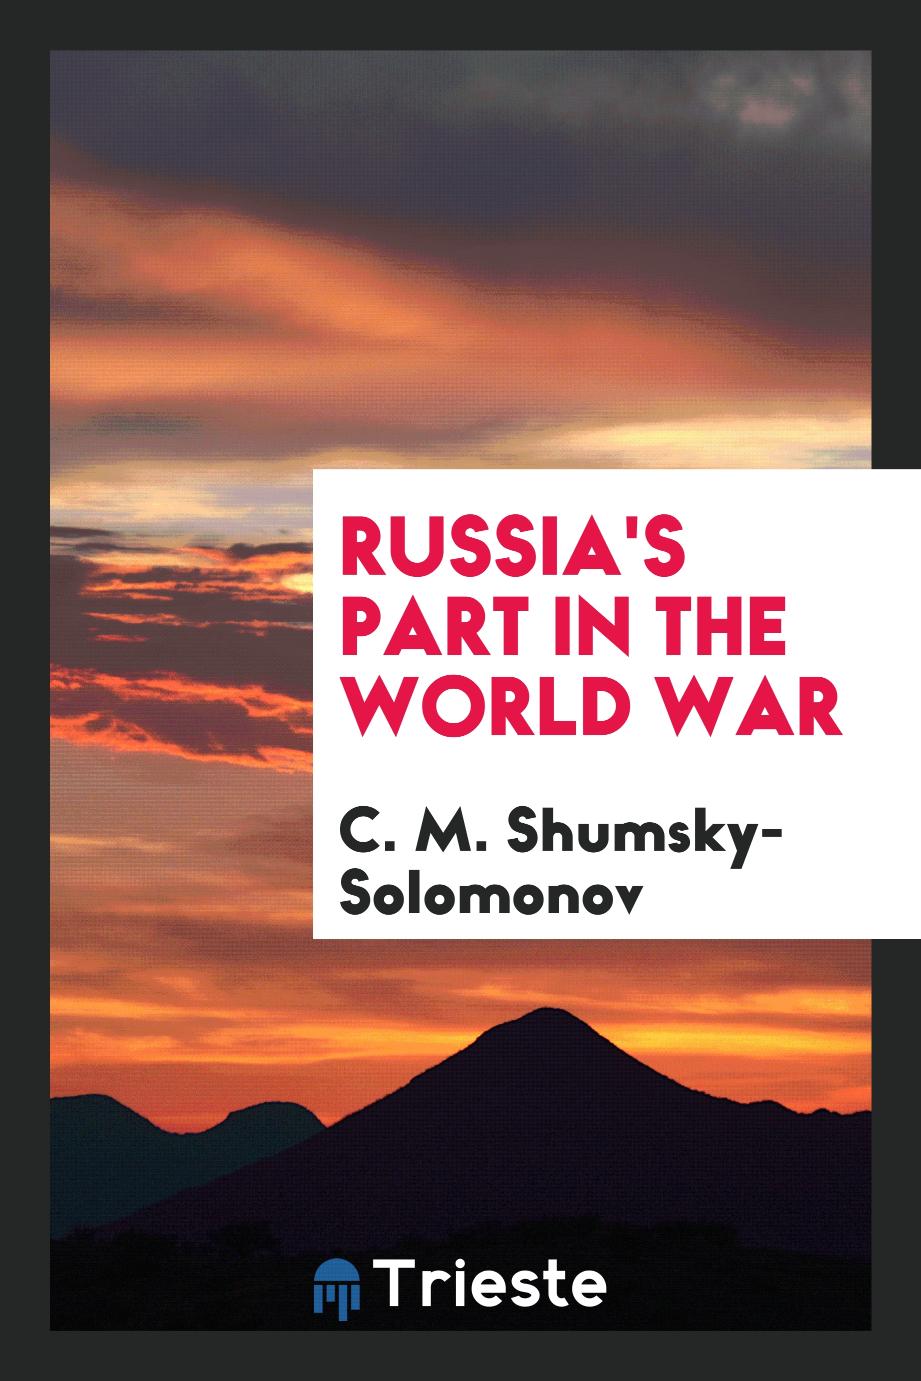 Russia's part in the World War